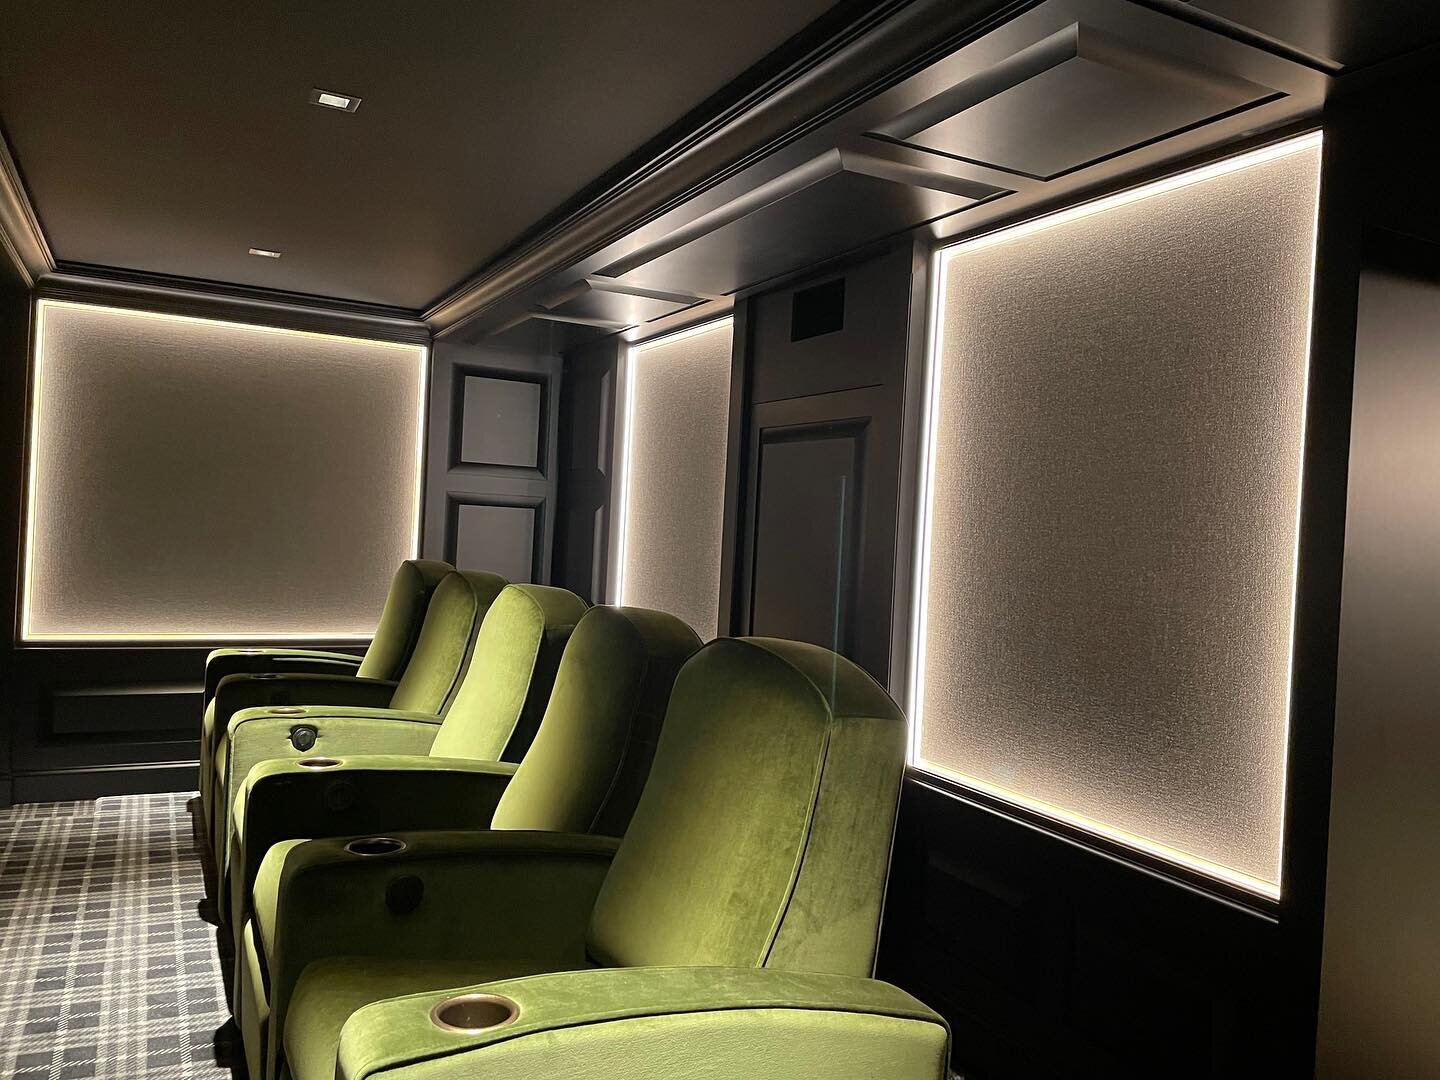 Flagship Home Cinema powered by:
Barco Loki Projector, Audiocontrol pre-amp and amplification, Origin Marquee Speakers all control by Savant system